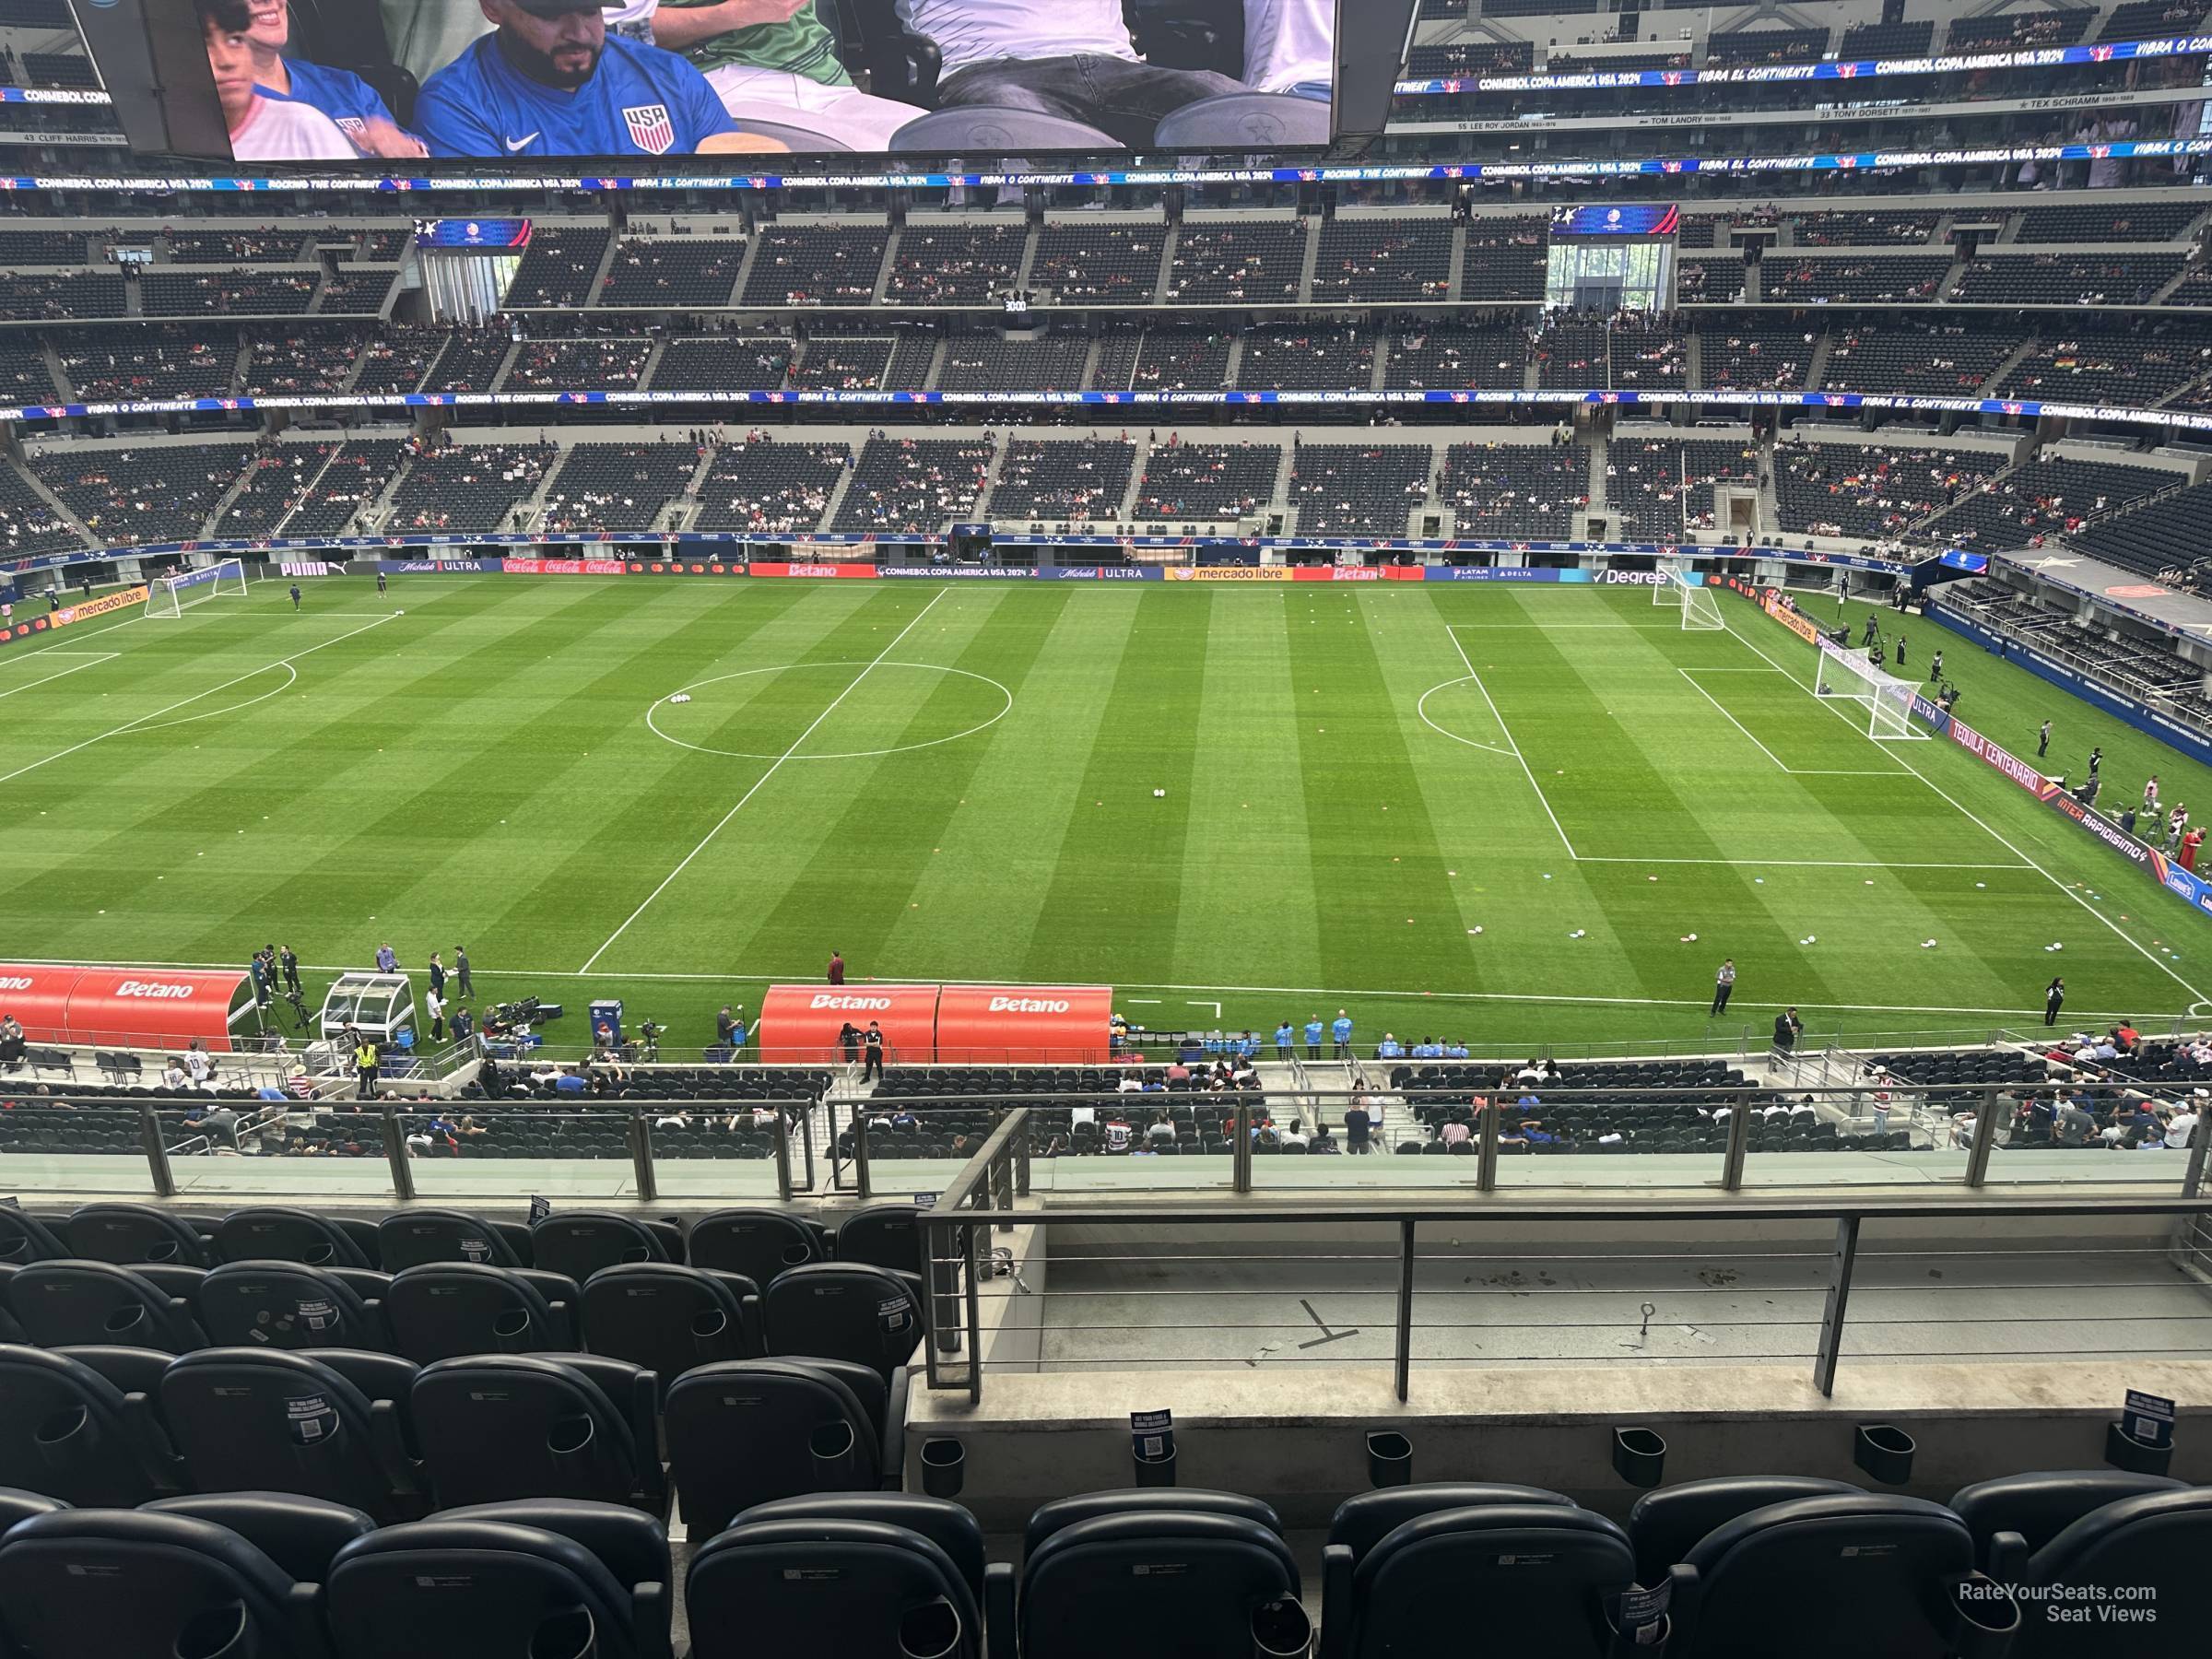 section c334, row 8 seat view  for soccer - at&t stadium (cowboys stadium)